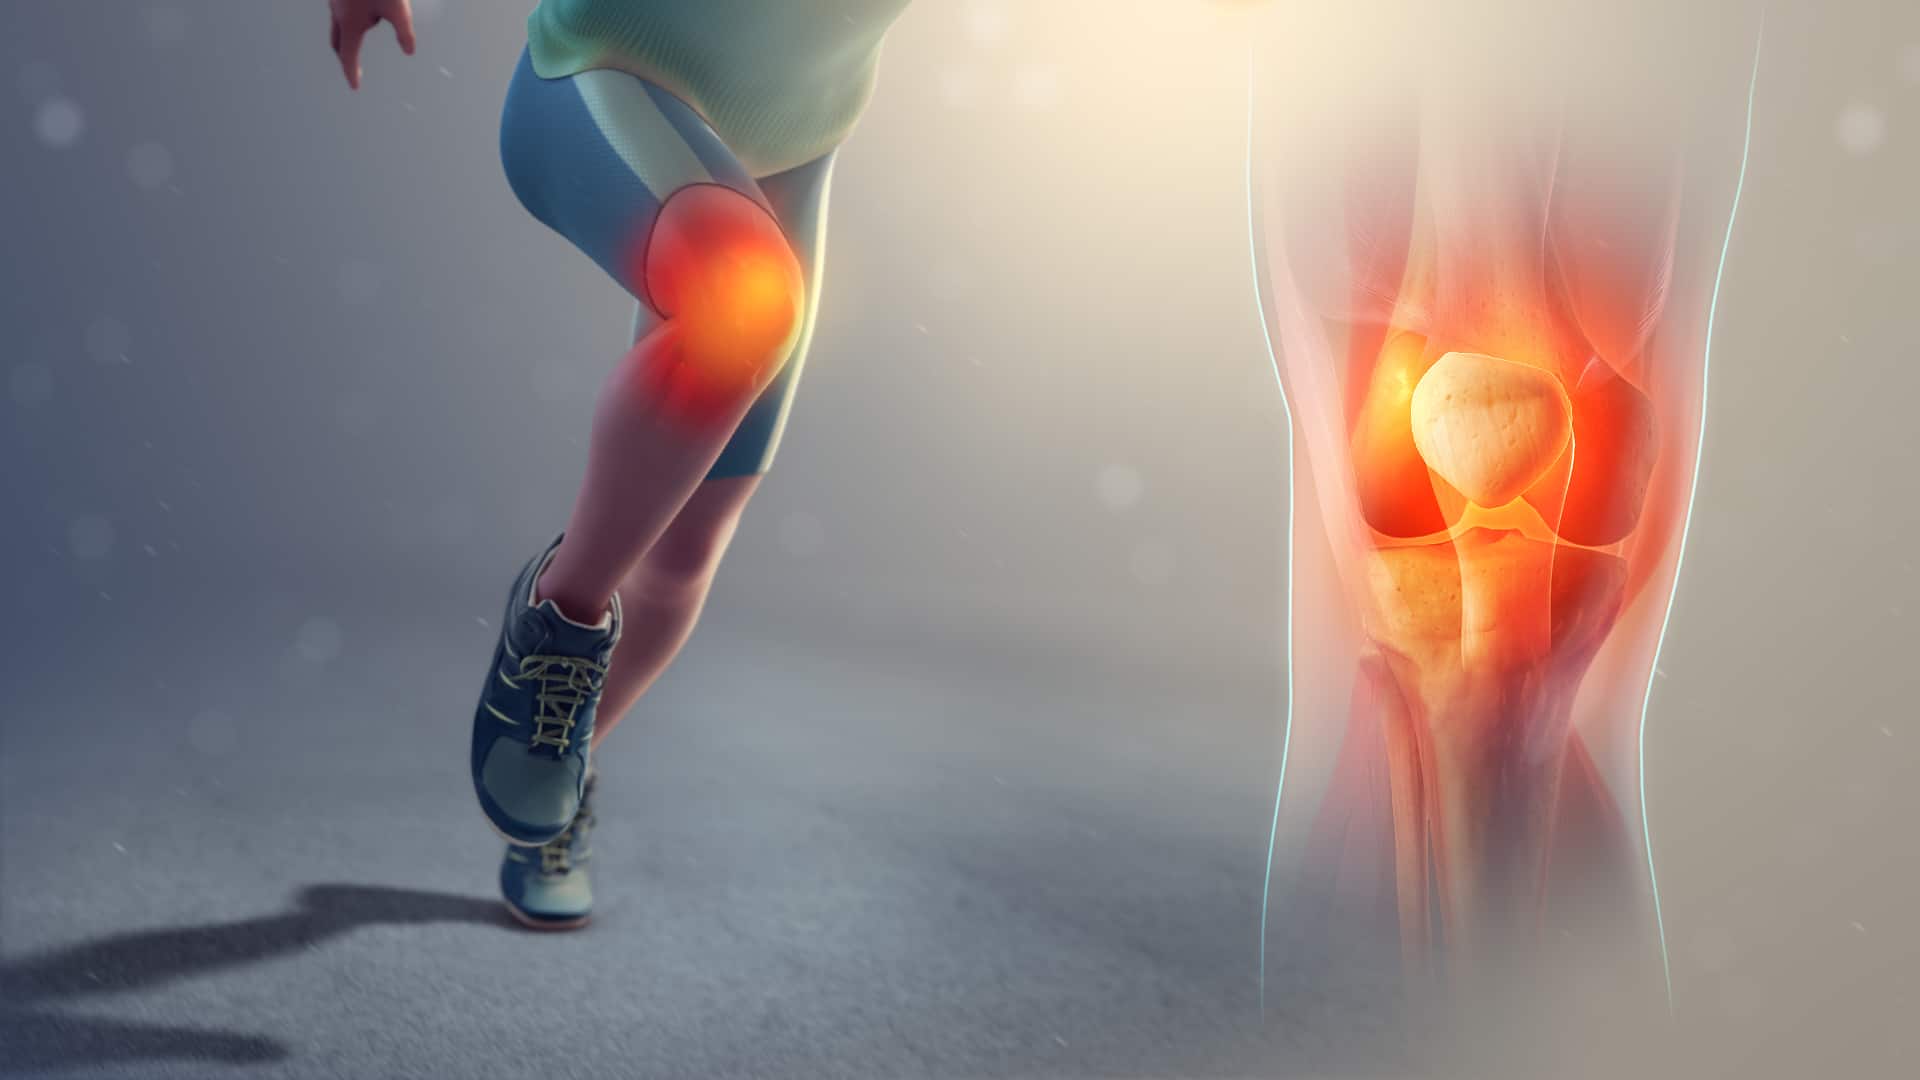 treatment for patellofemoral pain syndrome and runner's knee